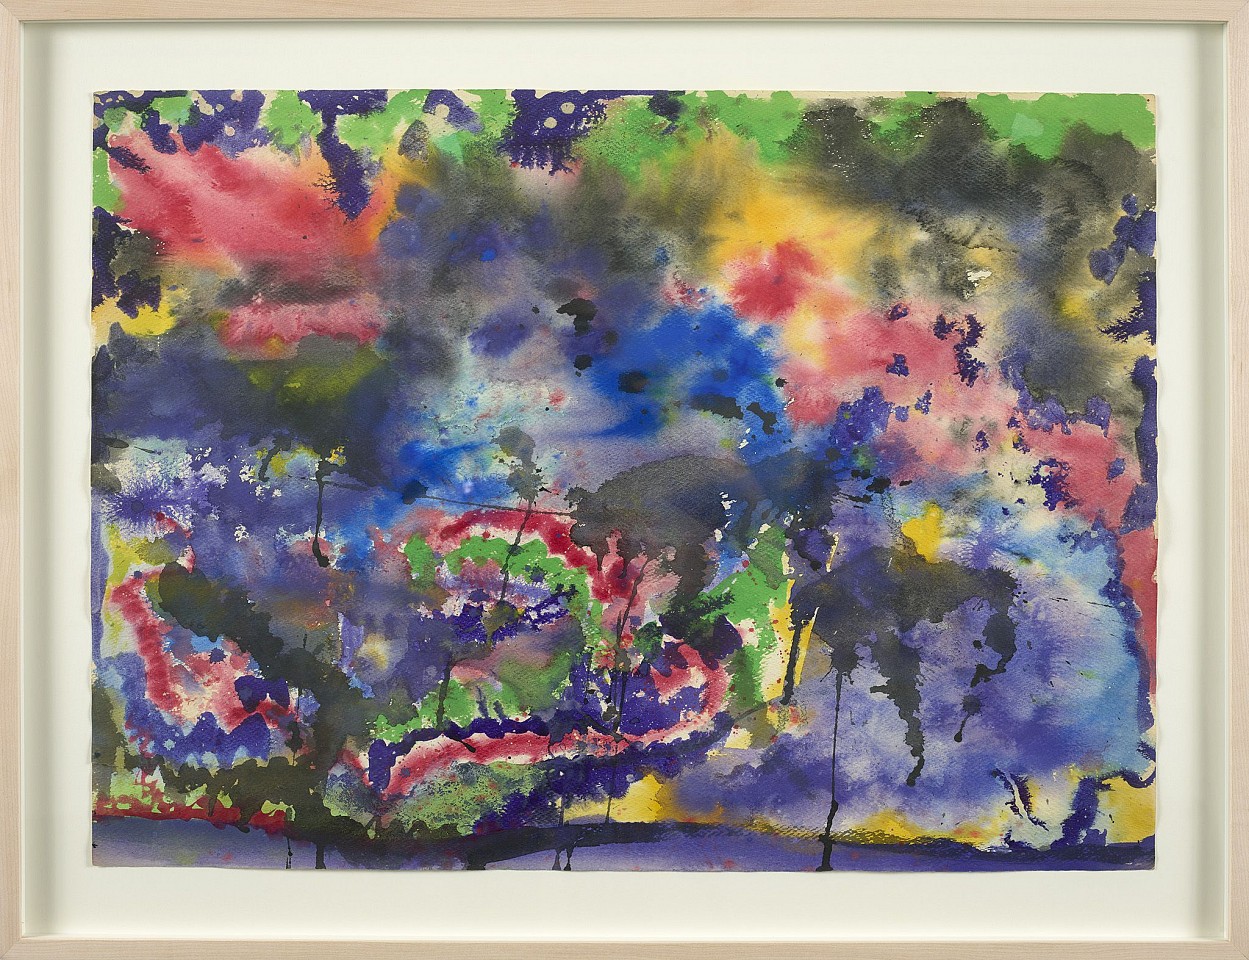 Frederick J. Brown, Untitled, 1970
Watercolor on paper, 21 3/4 x 29 3/4 in. (55.2 x 75.6 cm)
BROW-00009